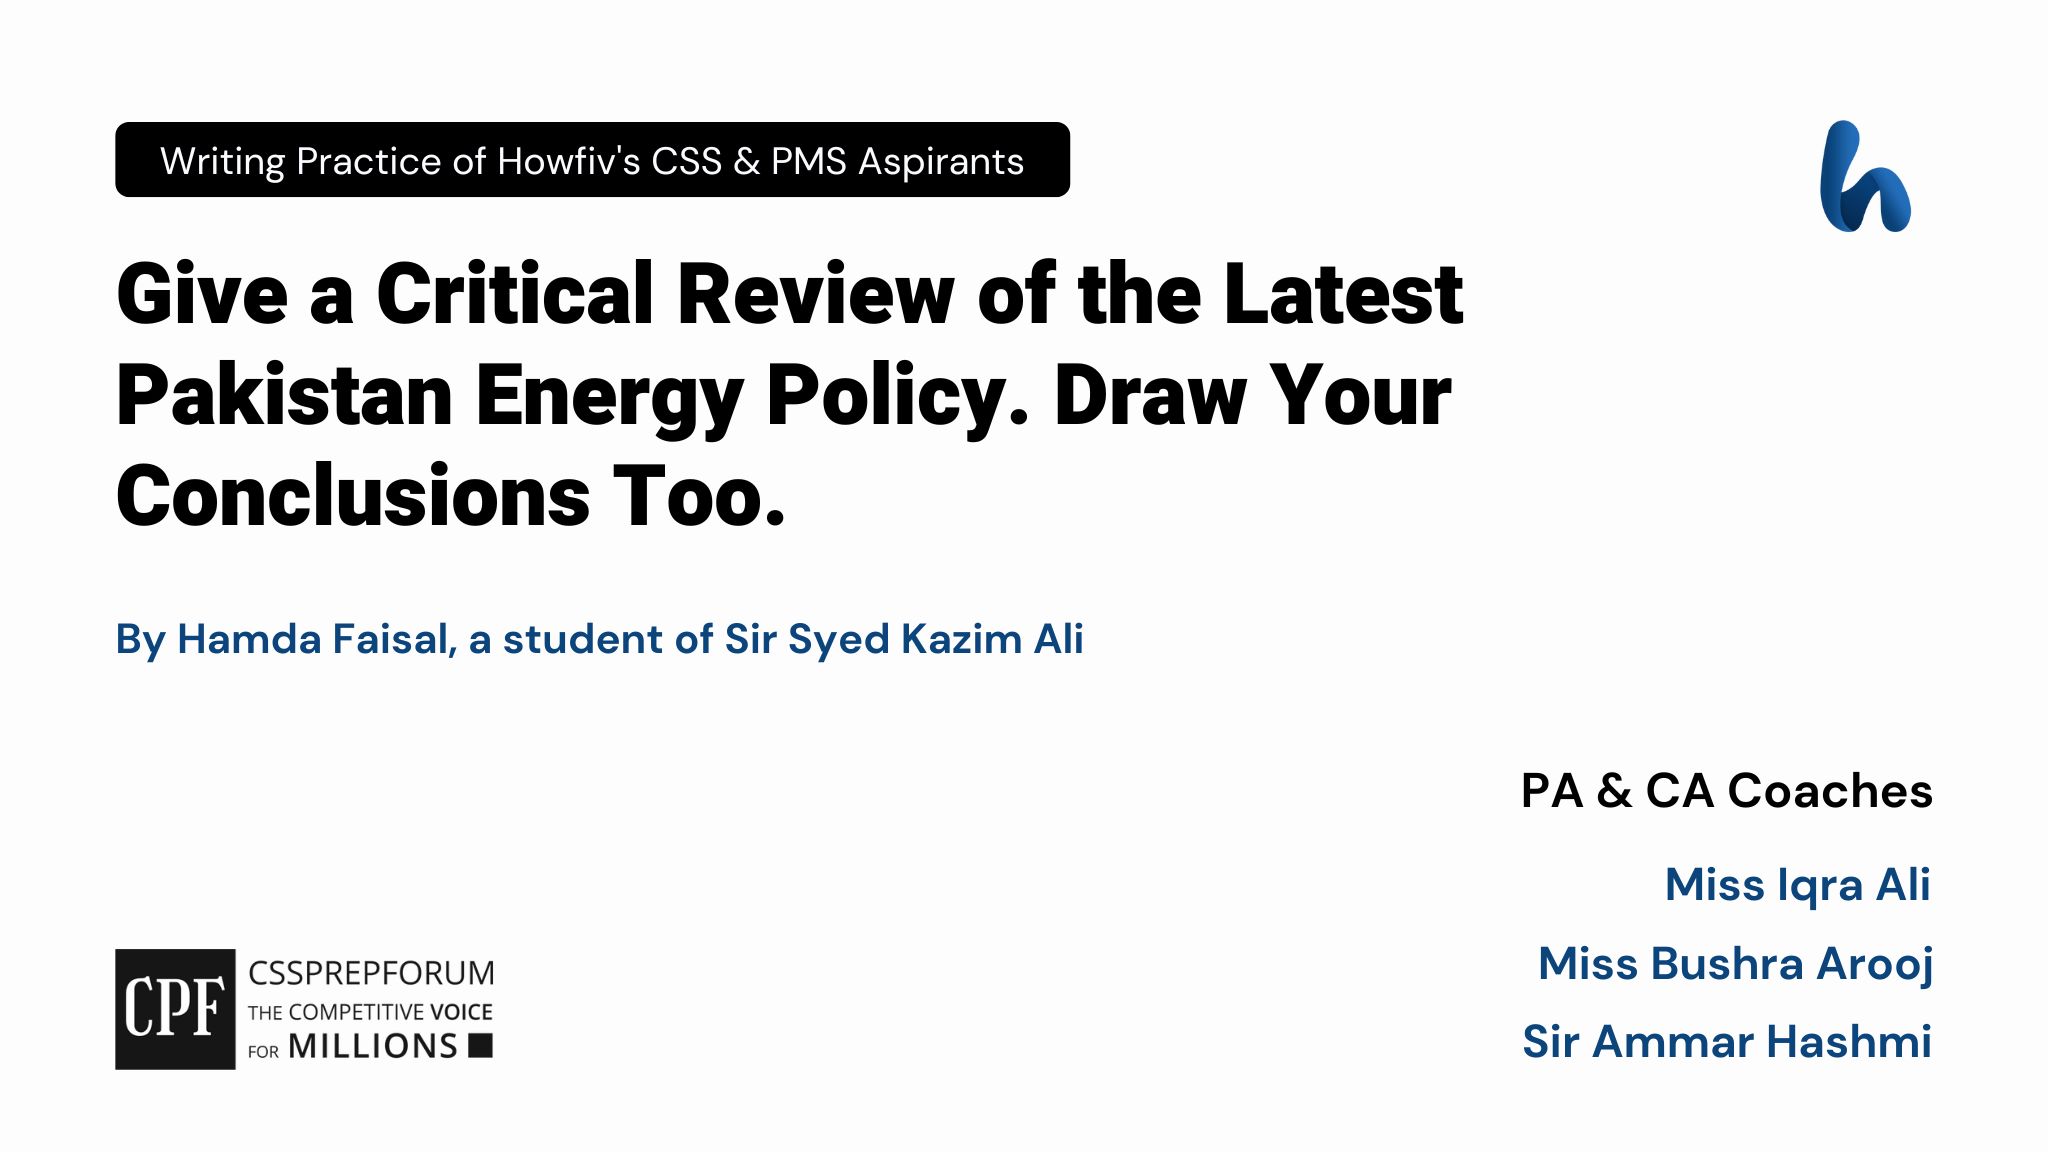 Review of the Latest Pakistan Energy Policy by Hamda Faisal